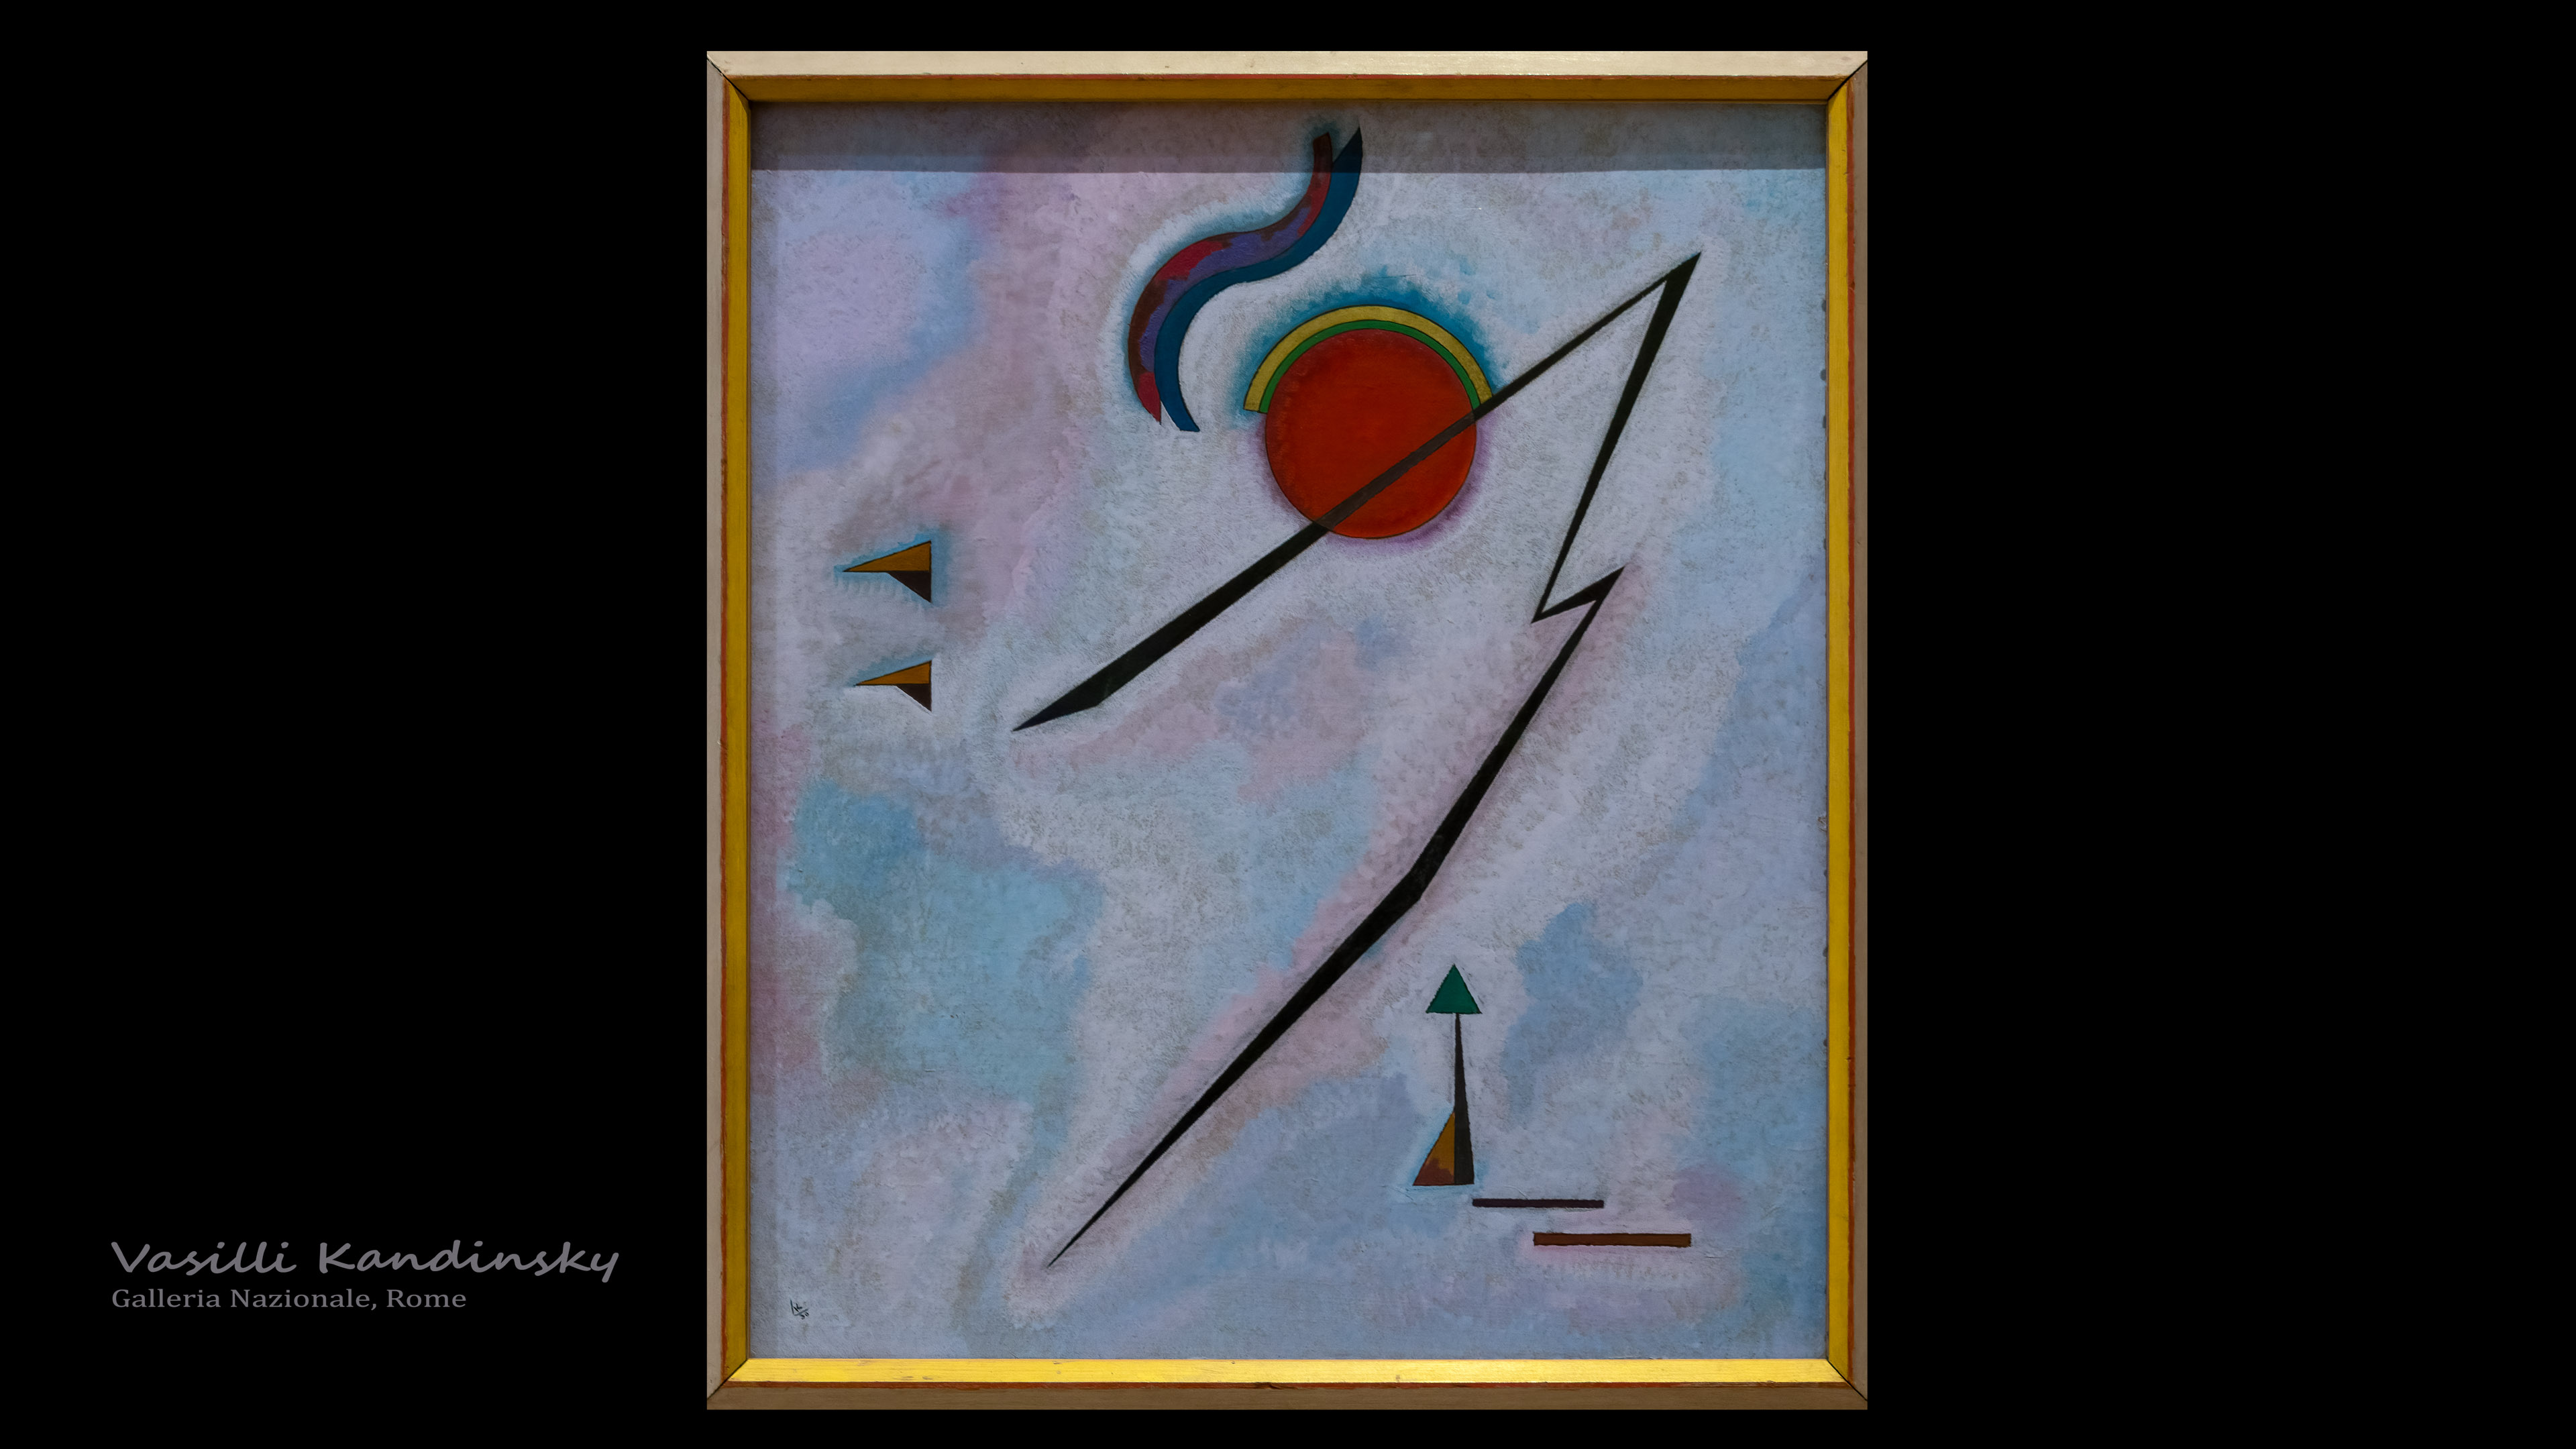 Experience the dynamism and harmony of the Russian Abstract artist with Kandinsky wallpaper, featuring his colorful and geometric compositions that expressed his spiritual and musical influences.